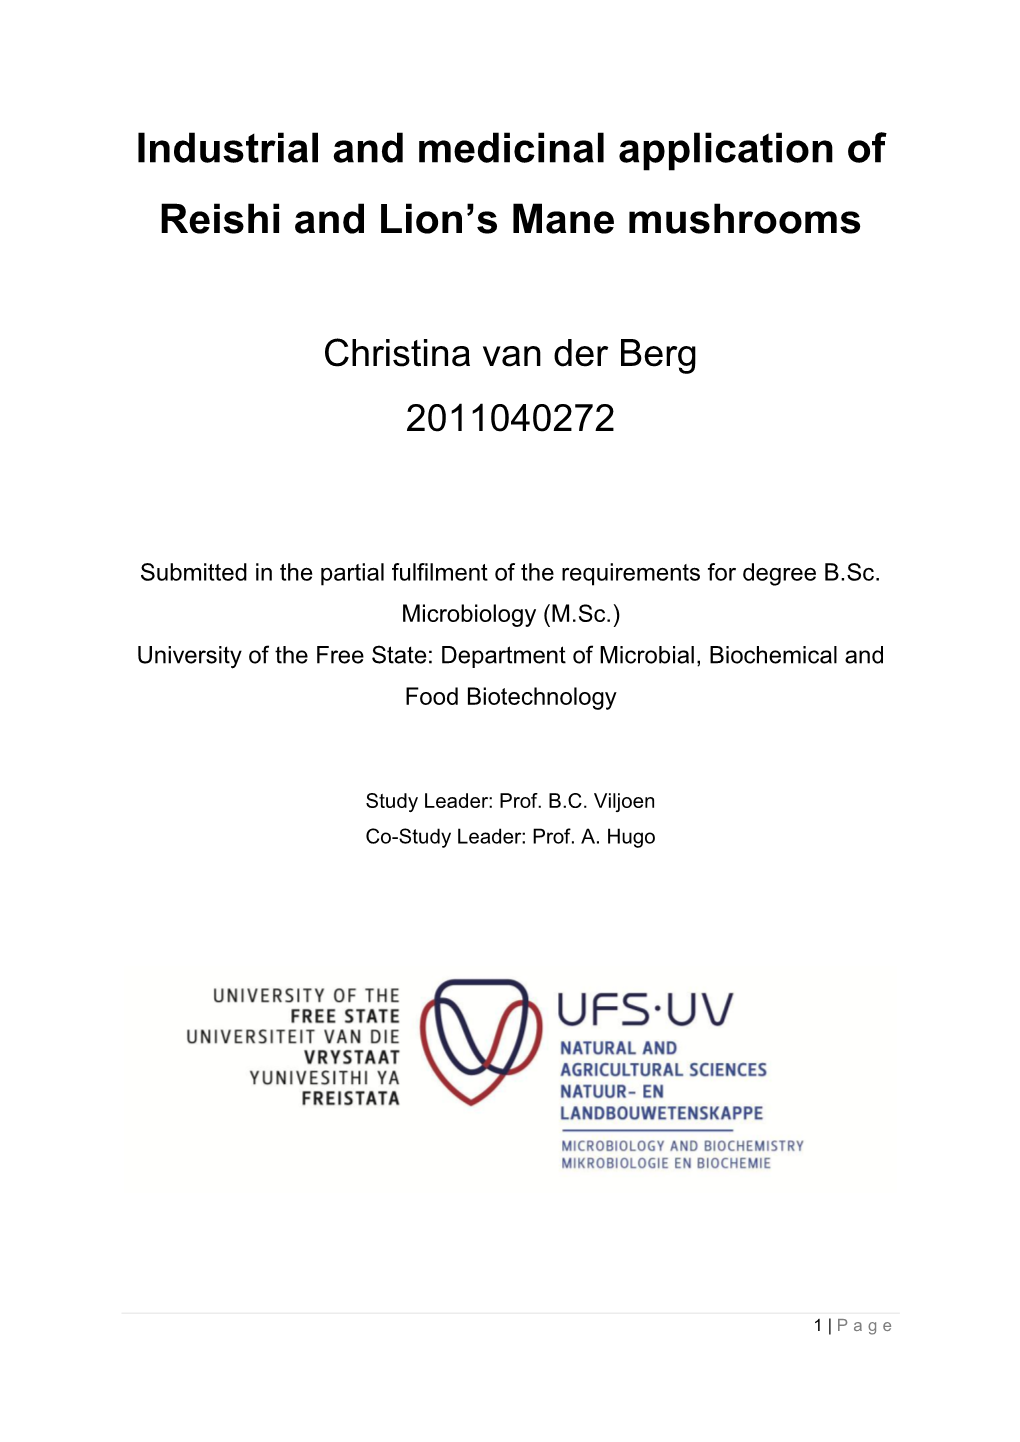 Industrial and Medicinal Application of Reishi and Lion's Mane Mushrooms